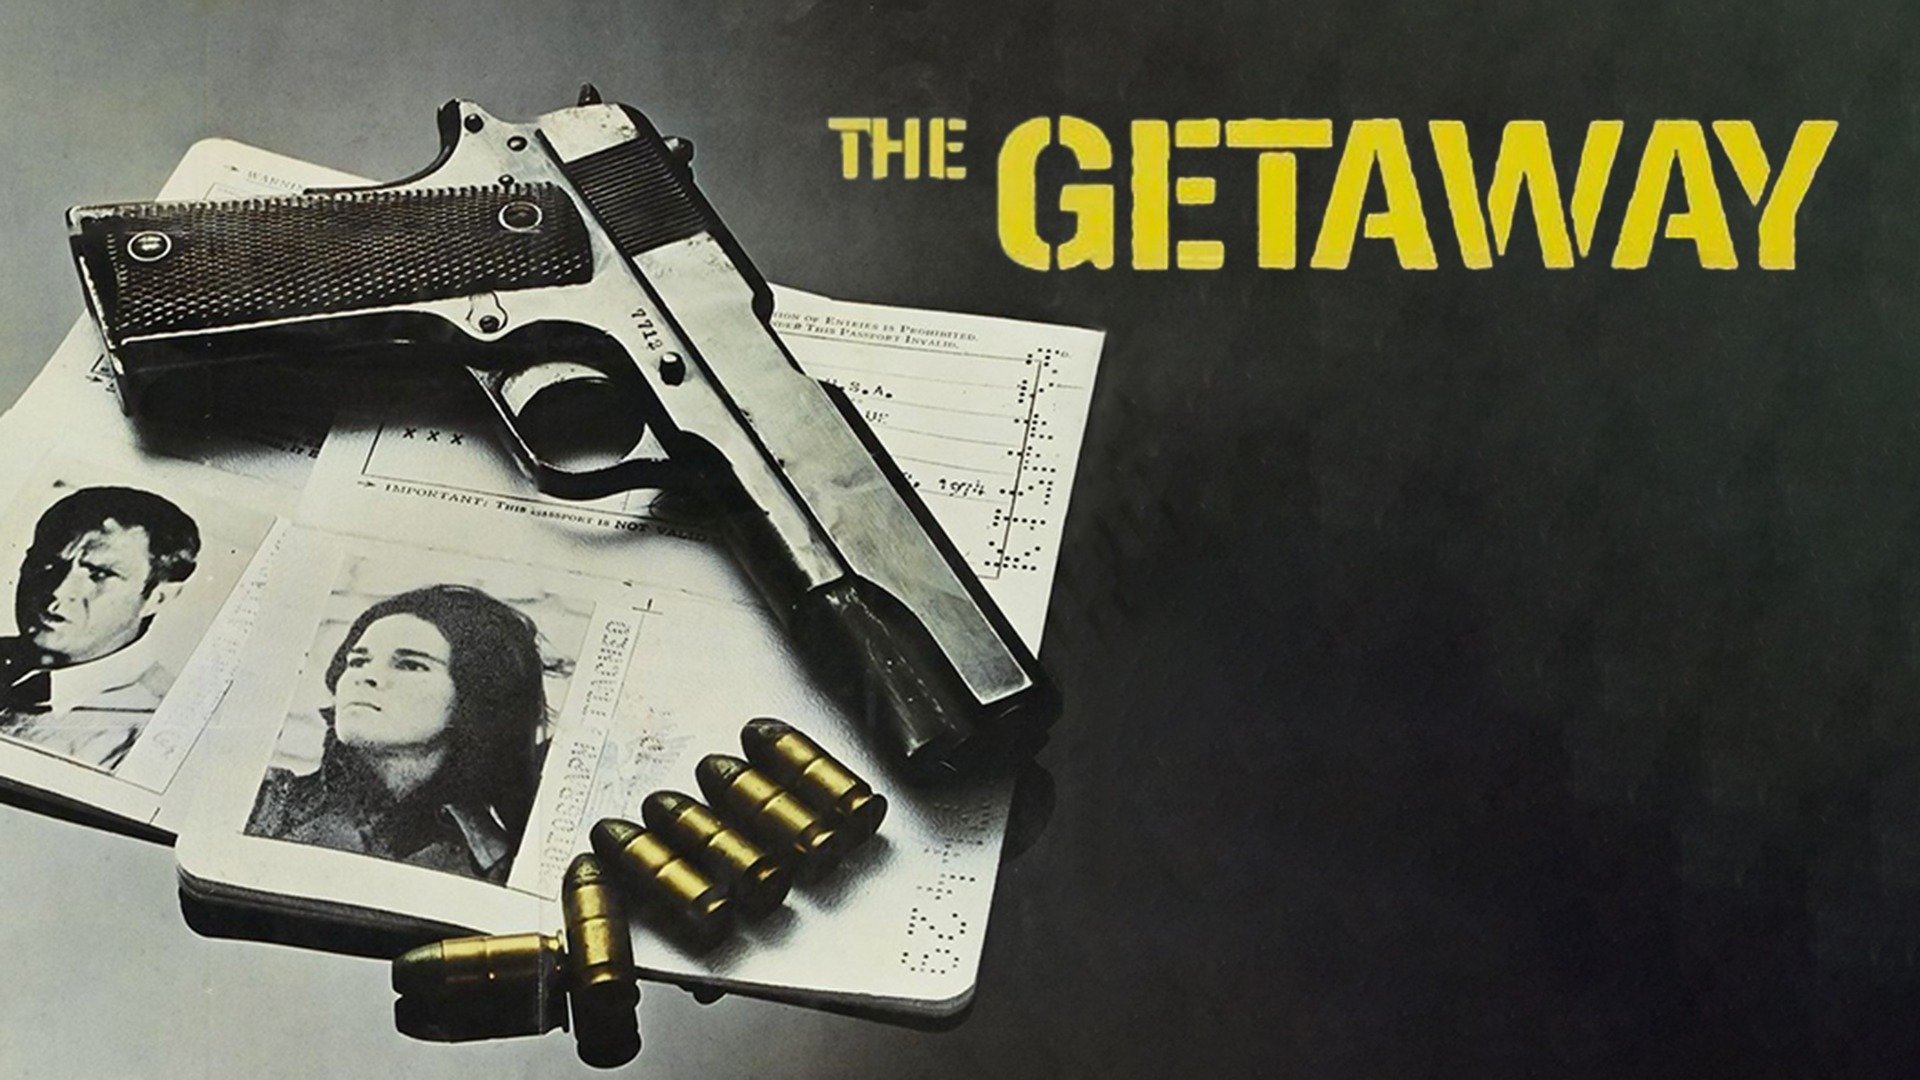 46-facts-about-the-movie-the-getaway